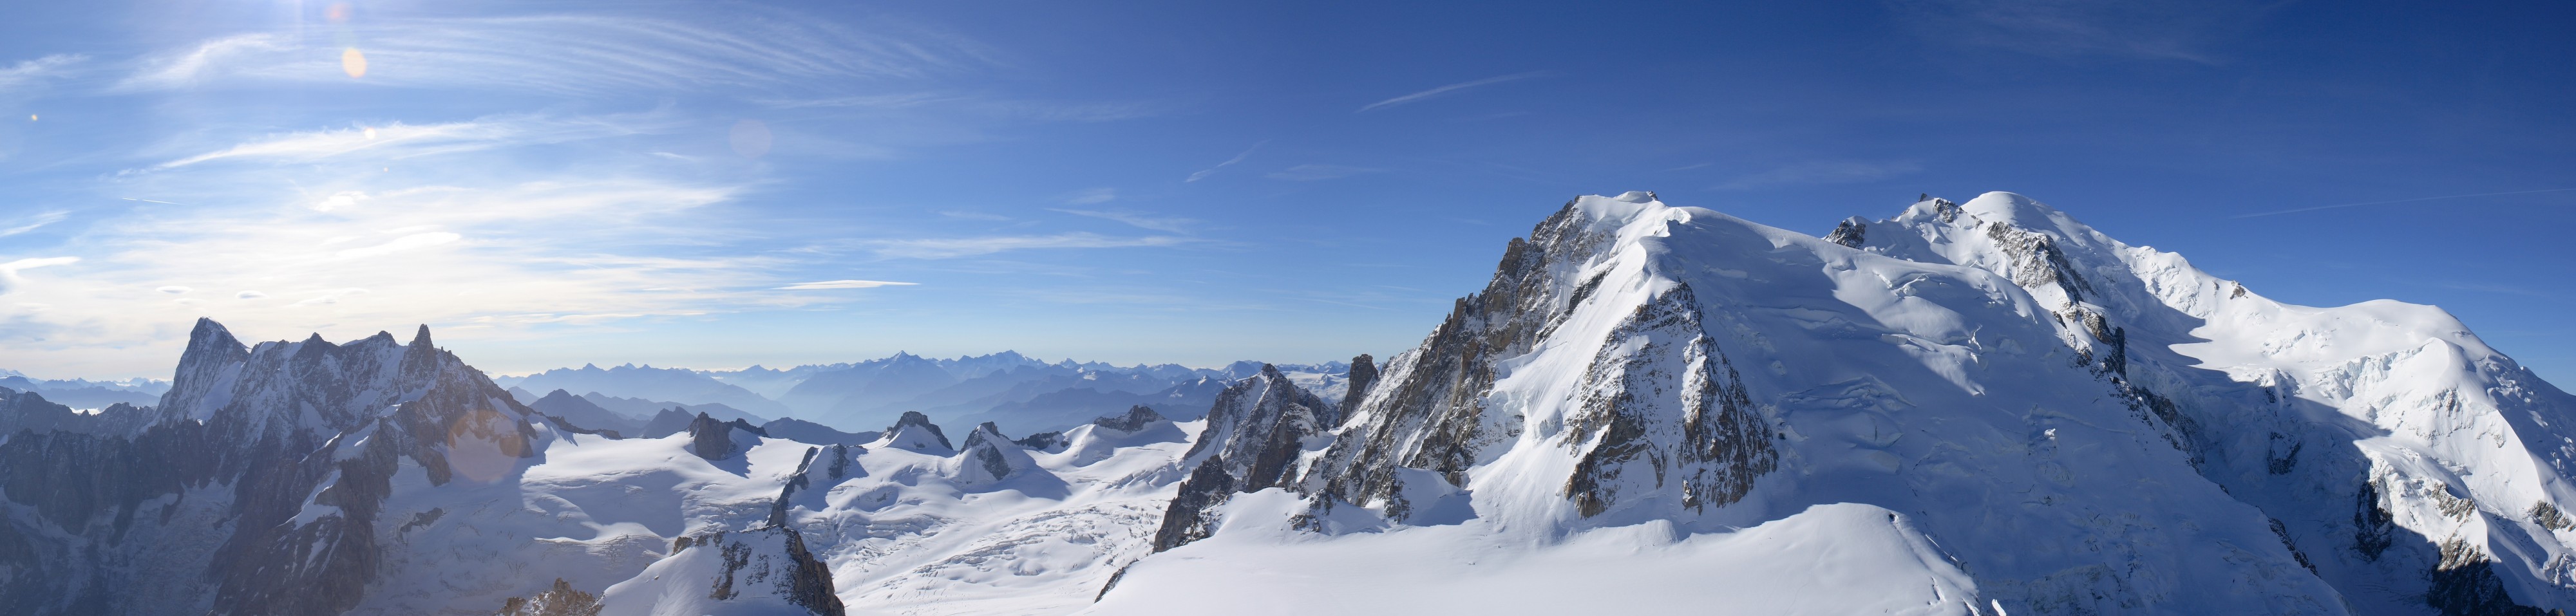 Pano from Aiguille du Midi 03